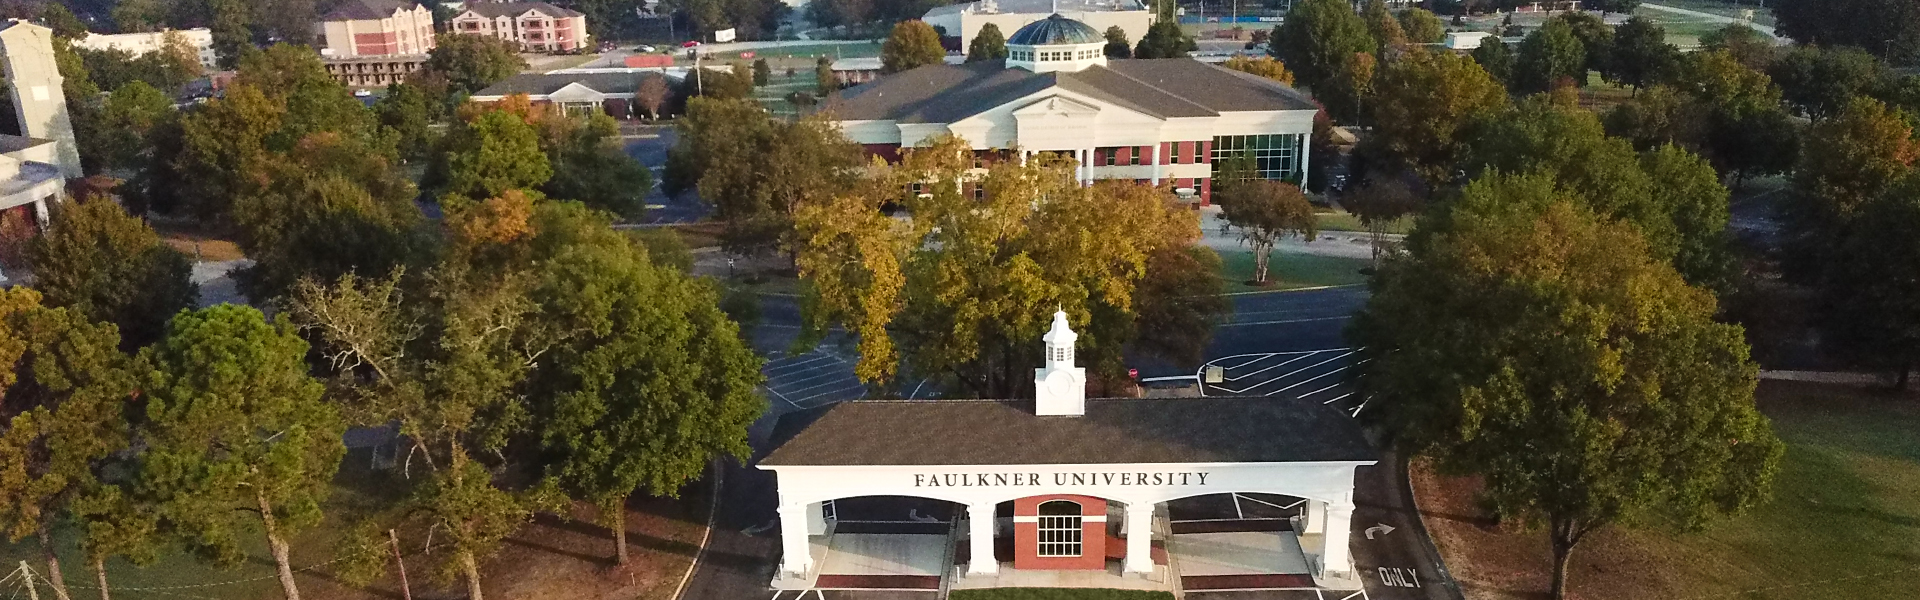 Entrance to the Faulkner University Montgomery Campus